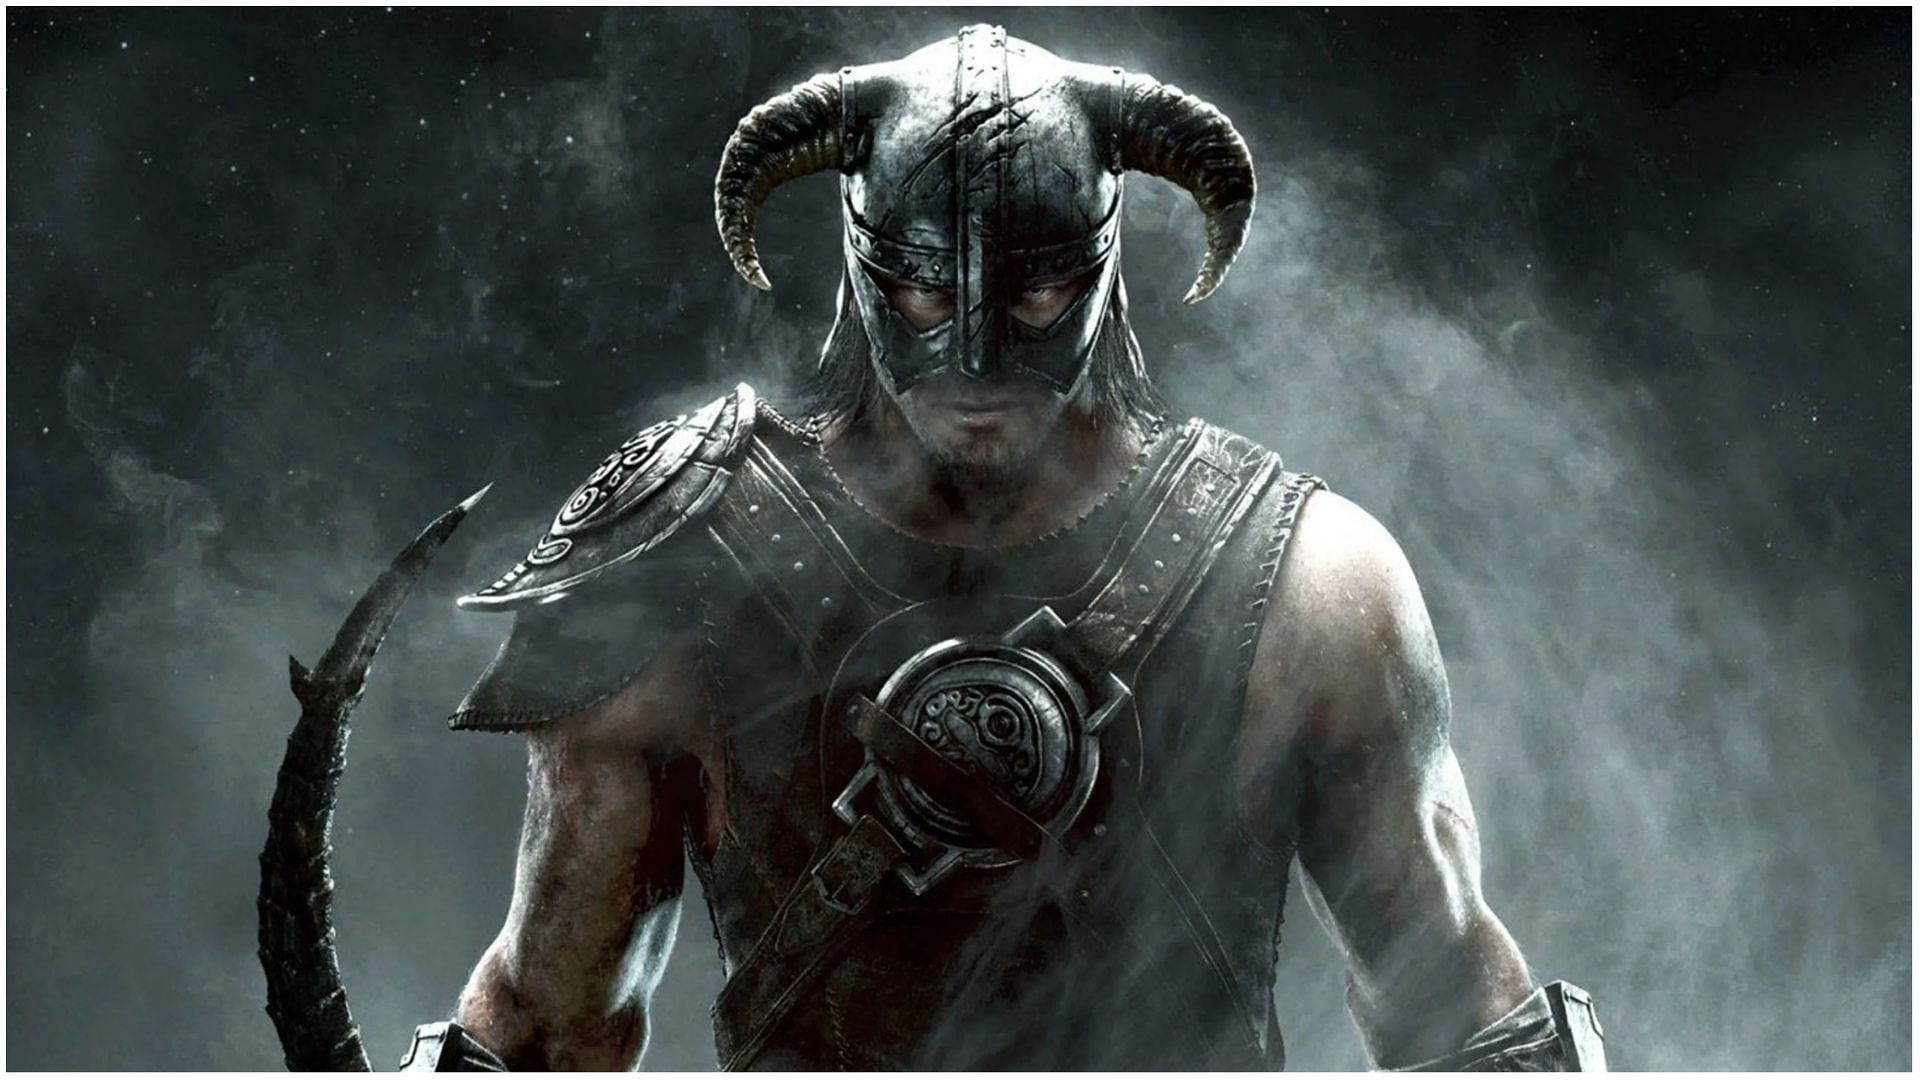 The Elder Scrolls V: Skyrim is one of the best well-known games of all time (Image via Bethesda)